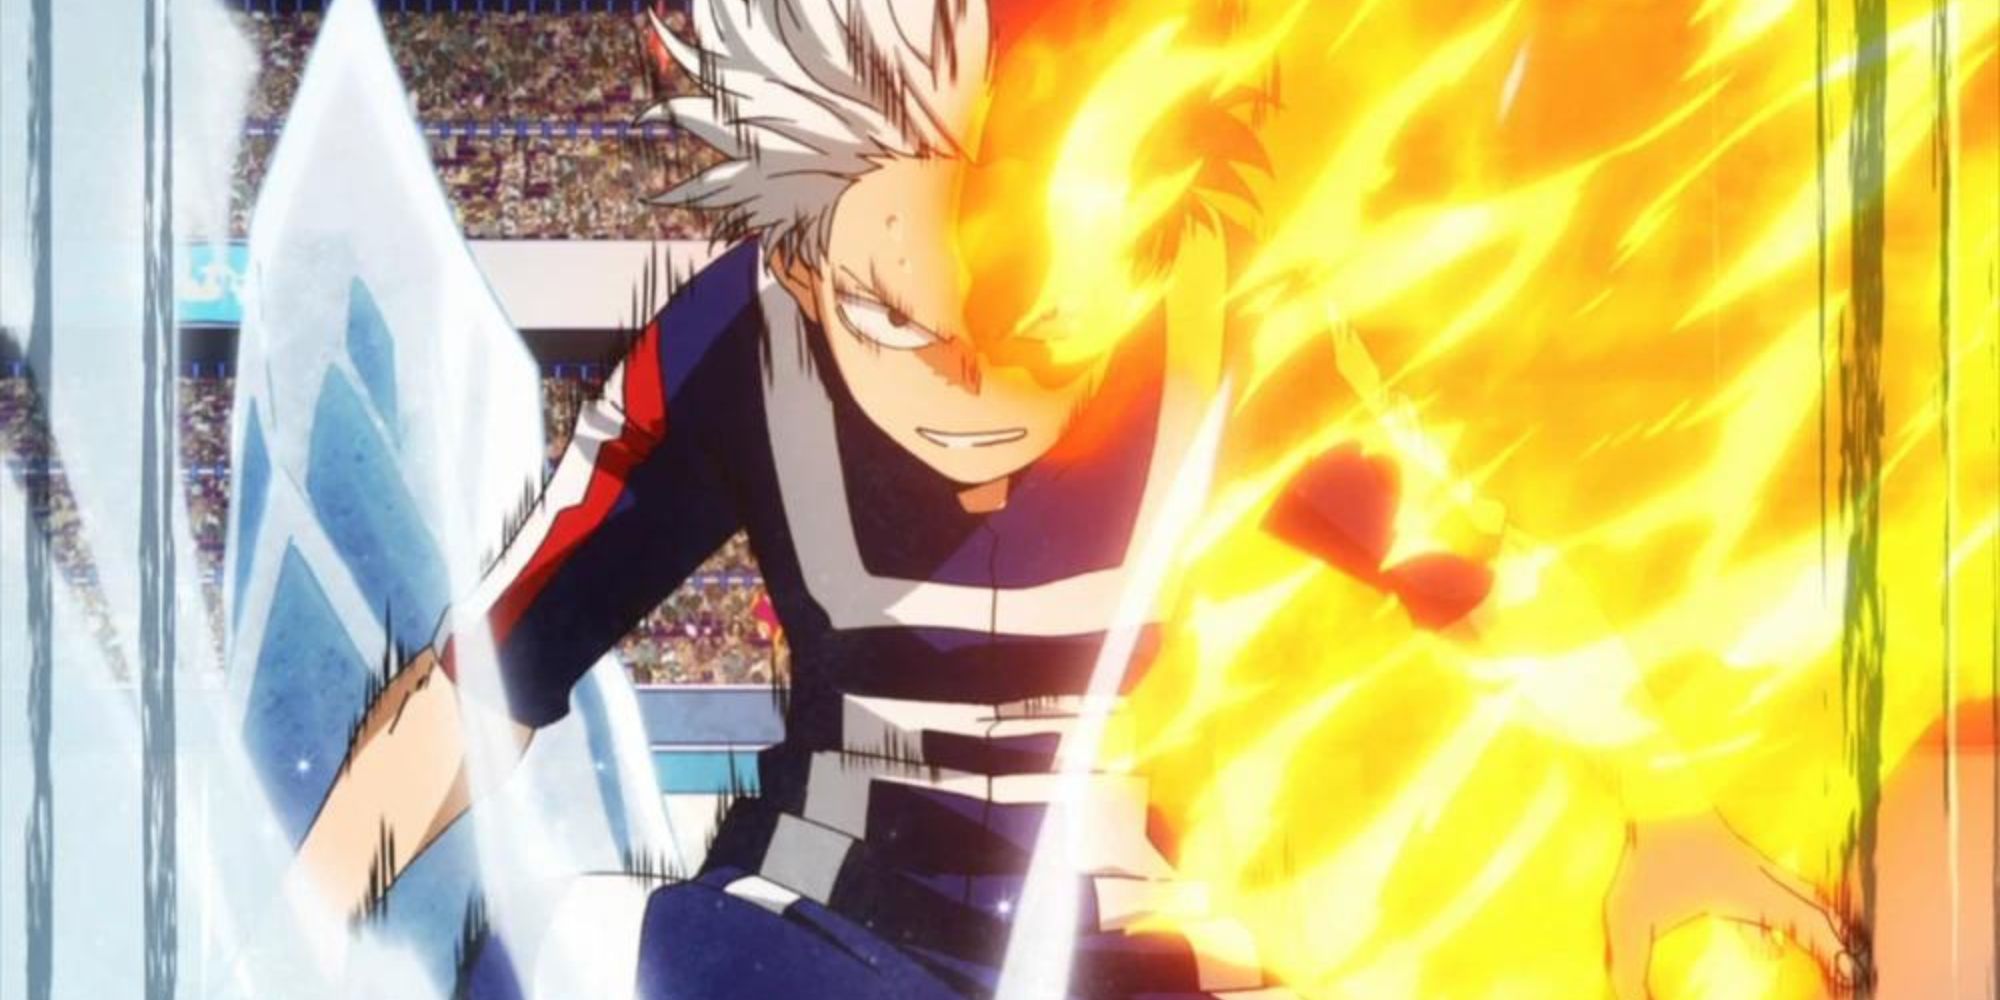 Shoto Todoroki uses his quirk to generate fire and ice from both halves of his body in My Hero Academia